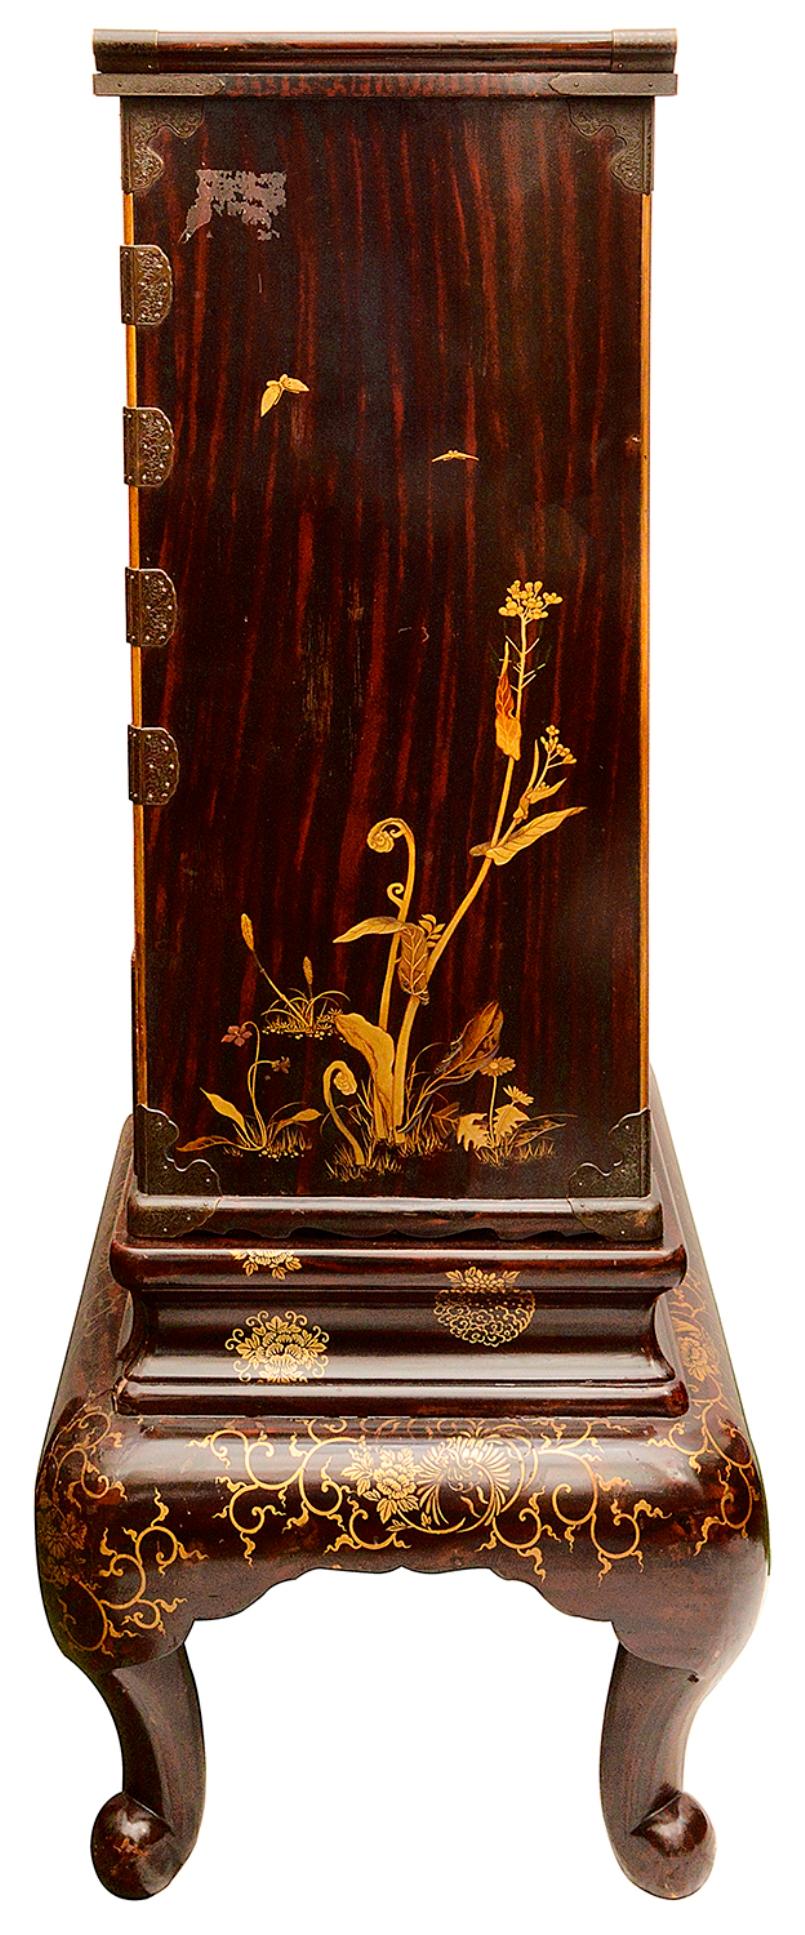 Japanese Lacquer Meiji Period Cabinet on Stand, circa 1890 For Sale 12